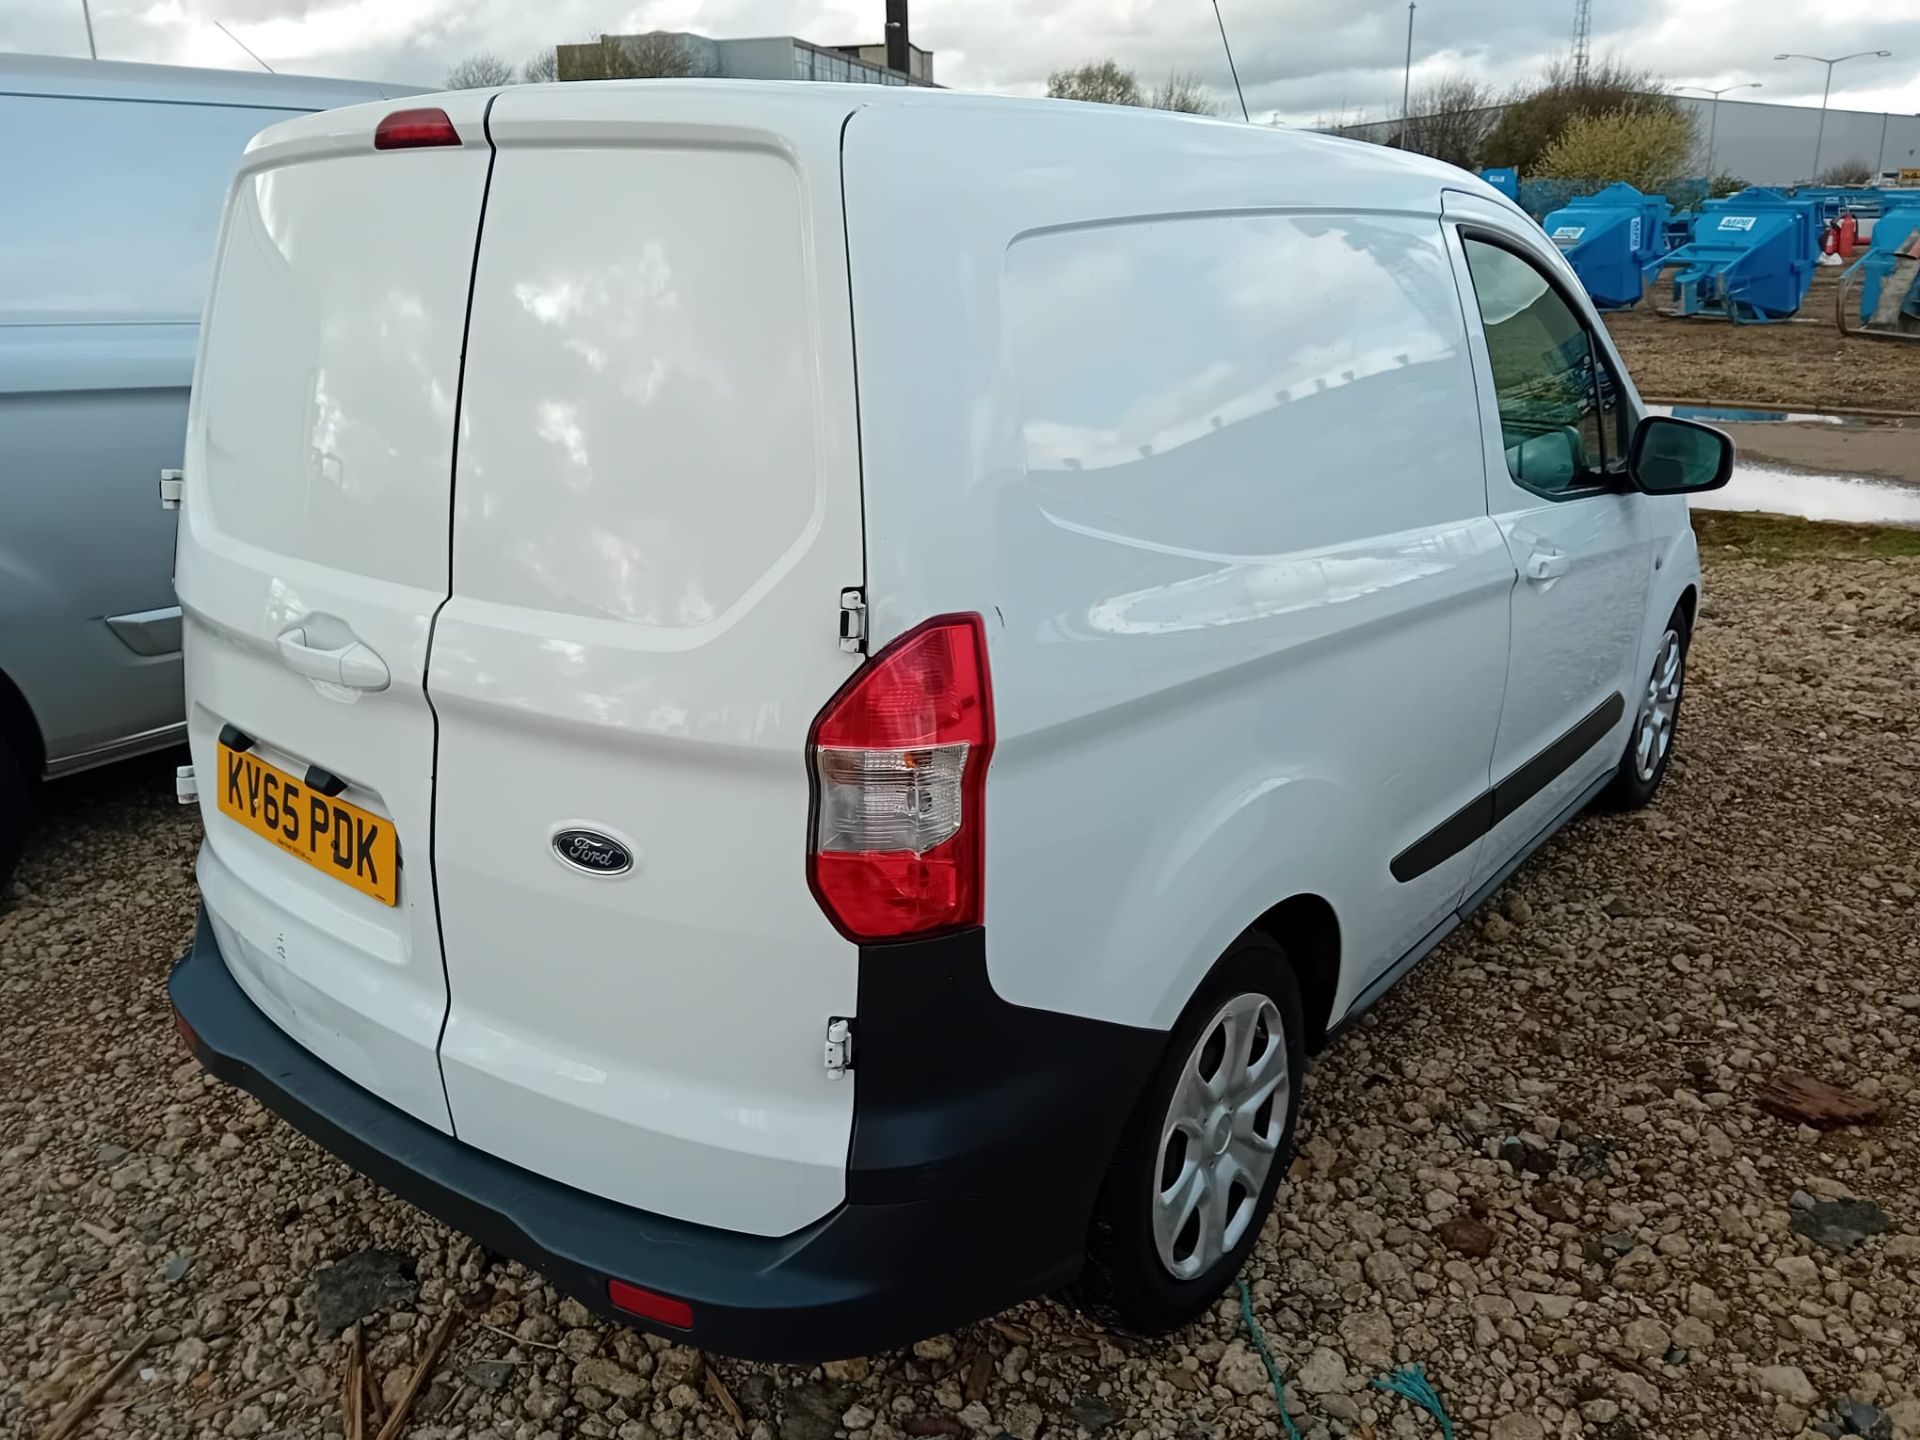 Ford transit Courier - Image 3 of 12